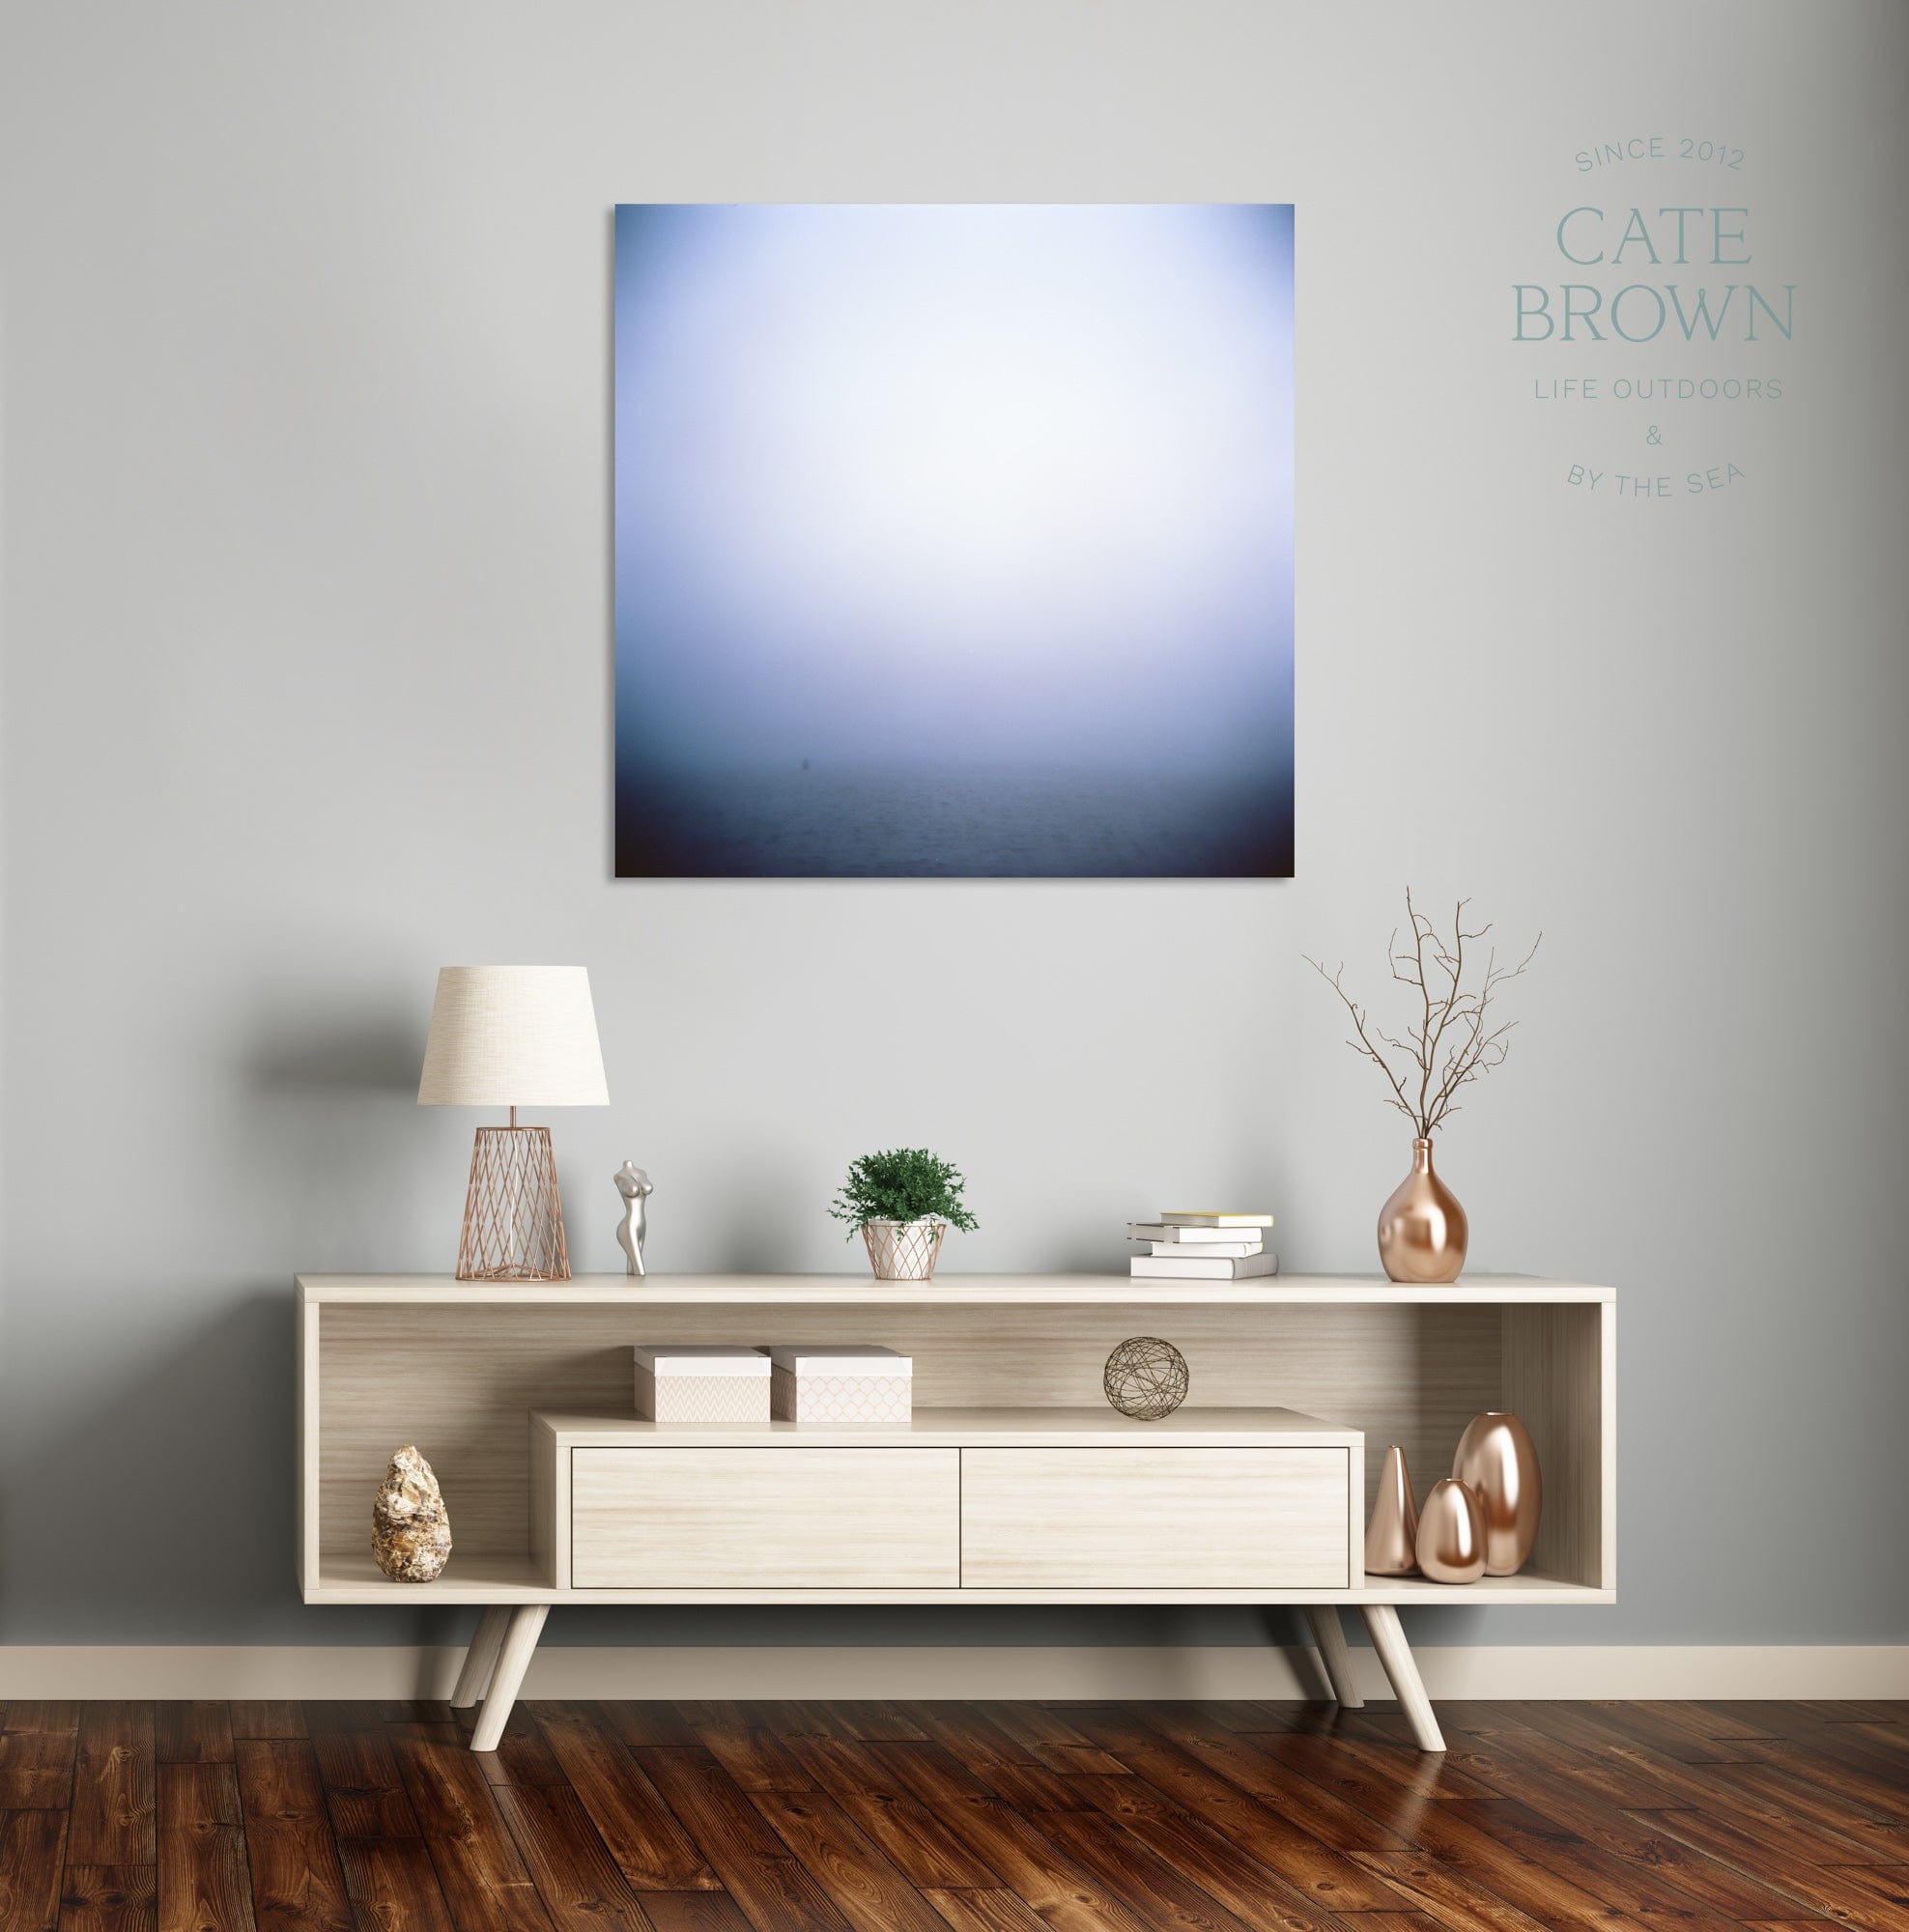 Cate Brown Photo Canvas / 16"x16" / None (Print Only) Cruising Through the Fog #2  //  Film Photography Made to Order Ocean Fine Art